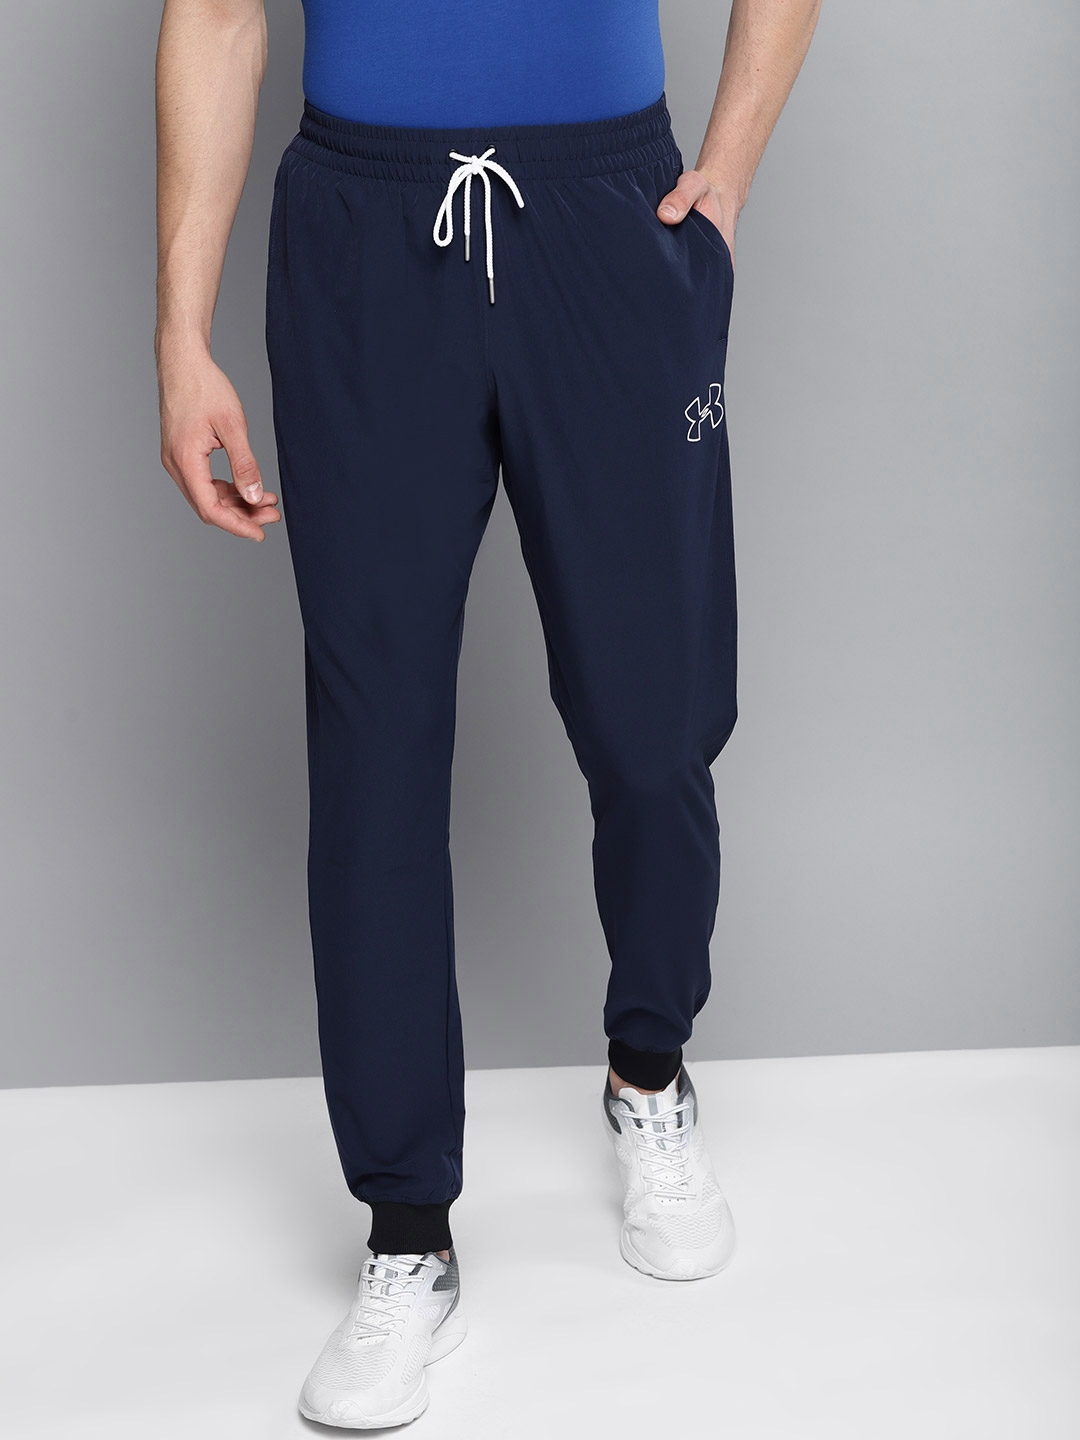 Buy UNDER ARMOUR Men Navy Blue Solid Baseline Woven Joggers - Track Pants Men 8774535 Myntra